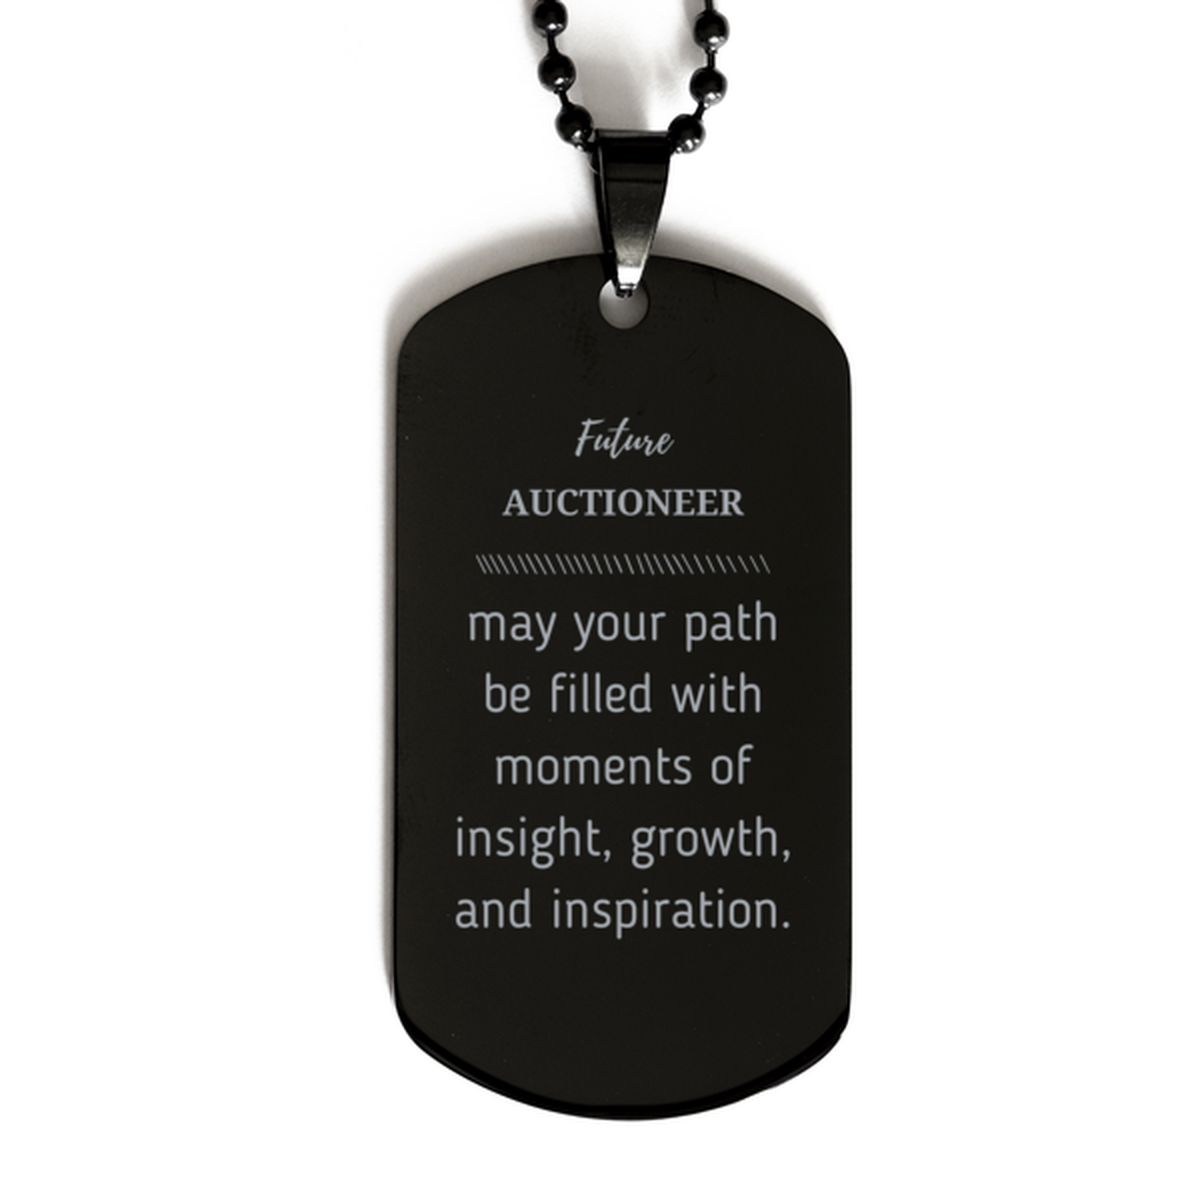 Future Auctioneer Gifts, May your path be filled with moments of insight, Graduation Gifts for New Auctioneer, Christmas Unique Black Dog Tag For Men, Women, Friends